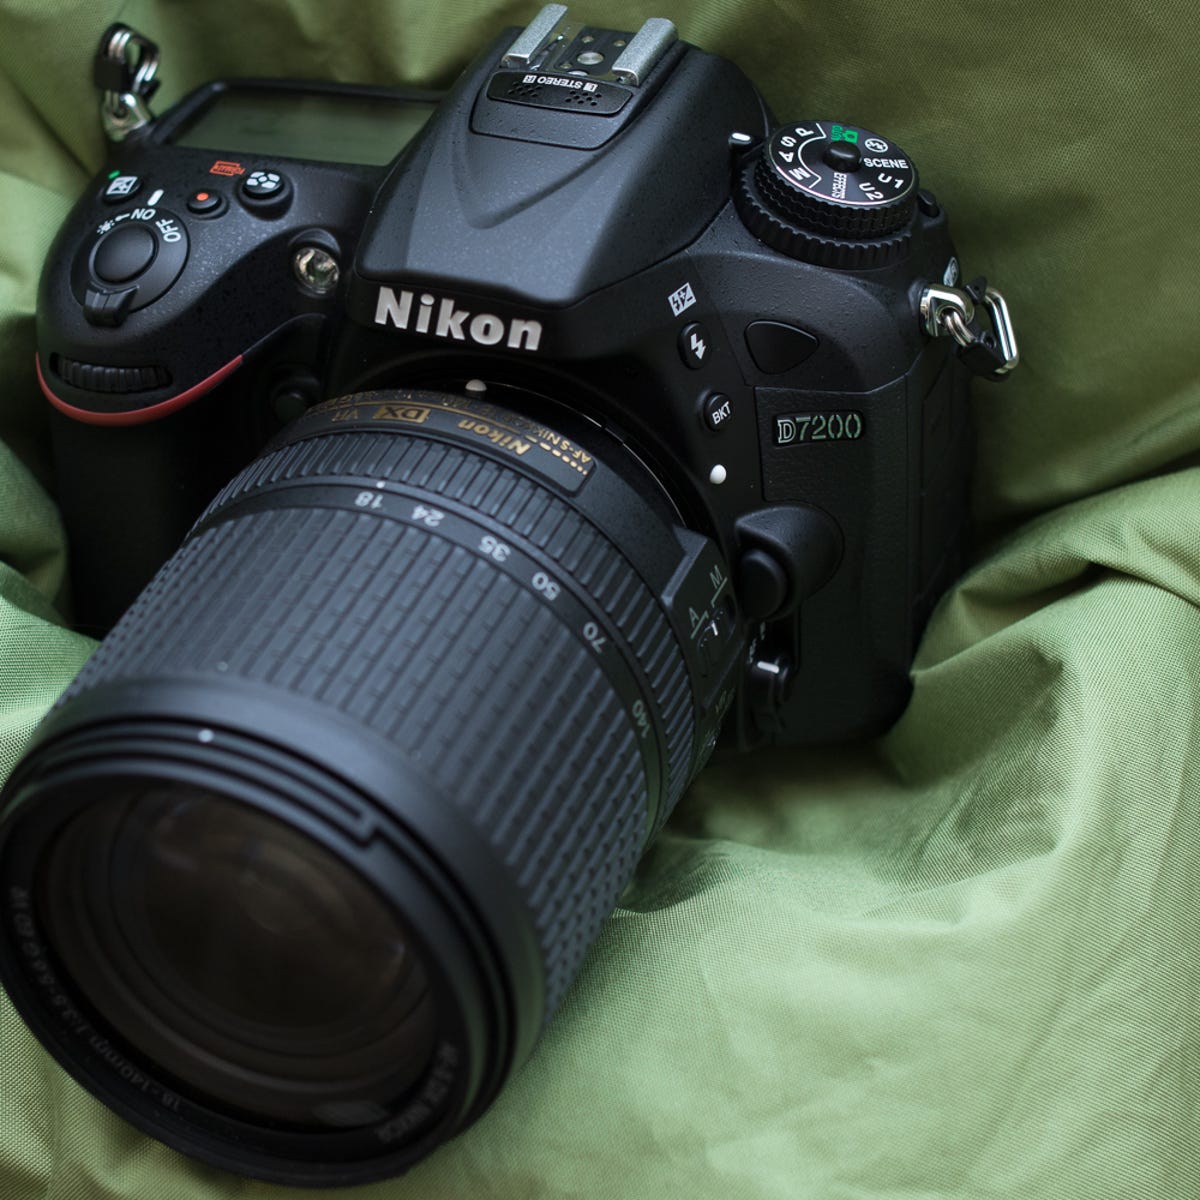 water the flower Susceptible to study Nikon D7200 Release Date, News, Price and Specs - CNET